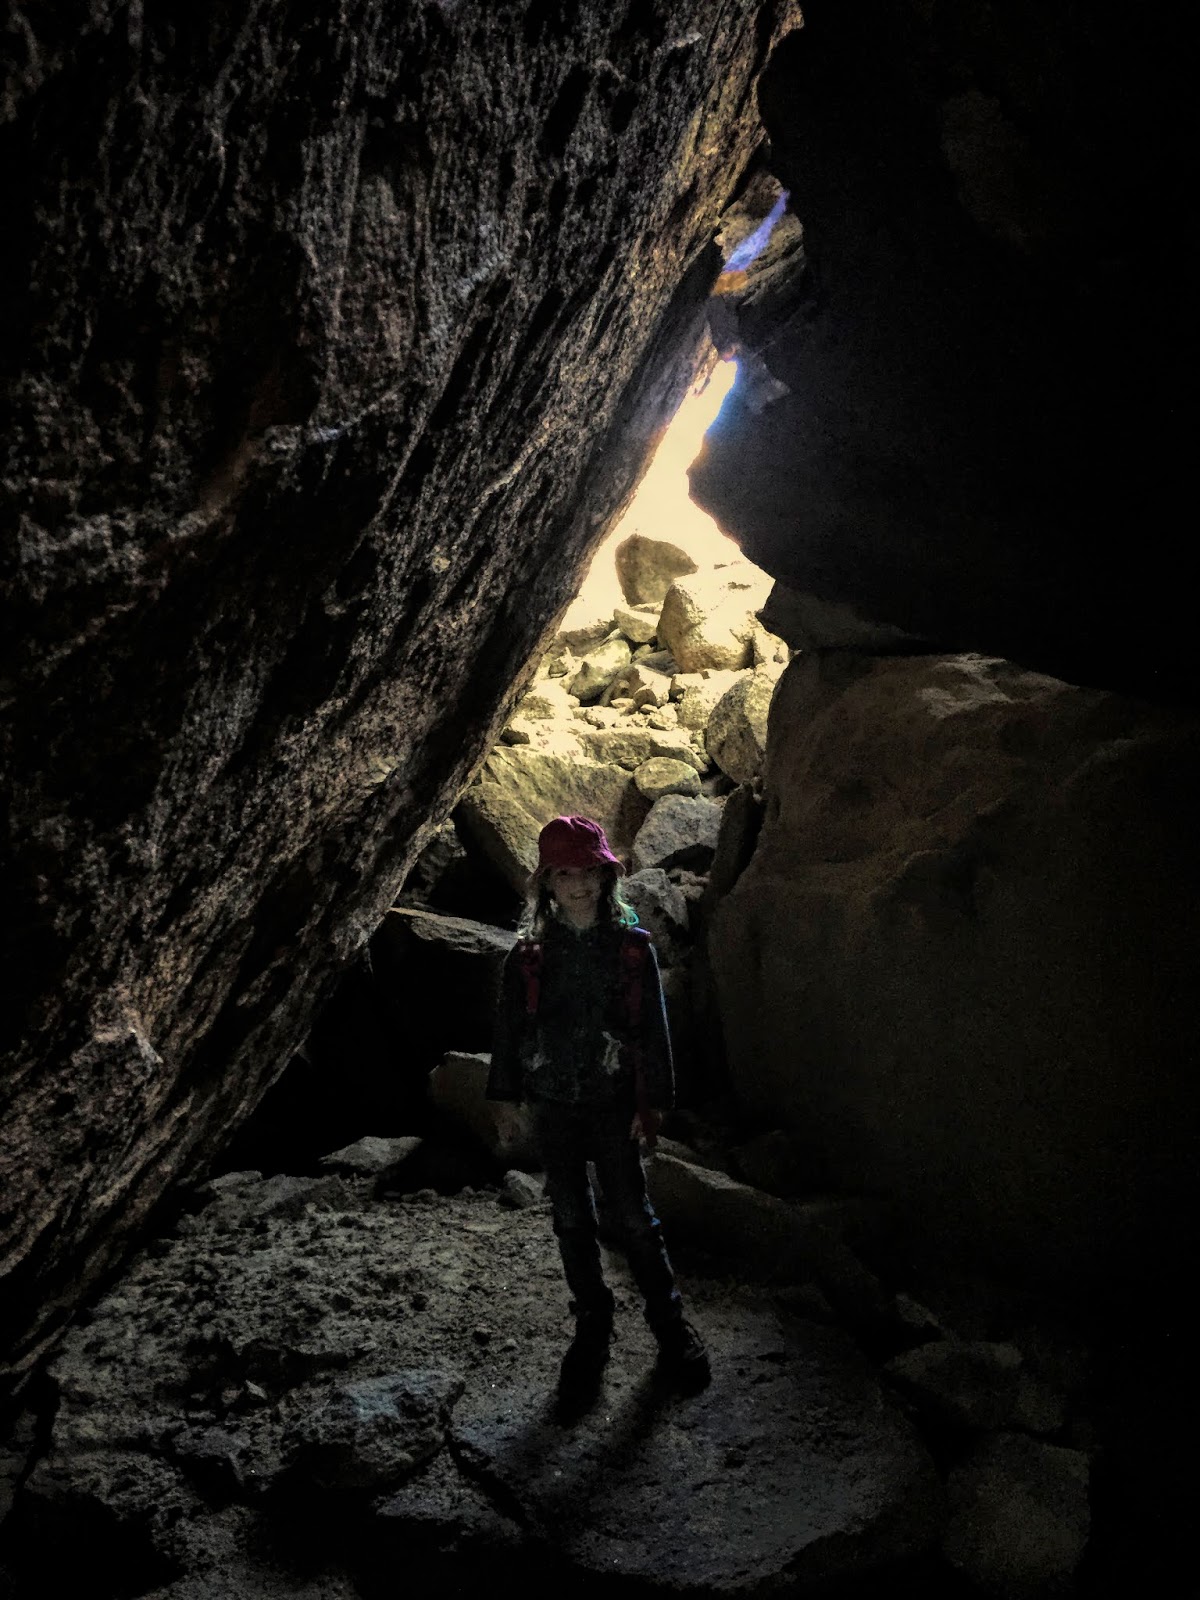 Spare Parts and Pics: Return to Rattlesnake Cave